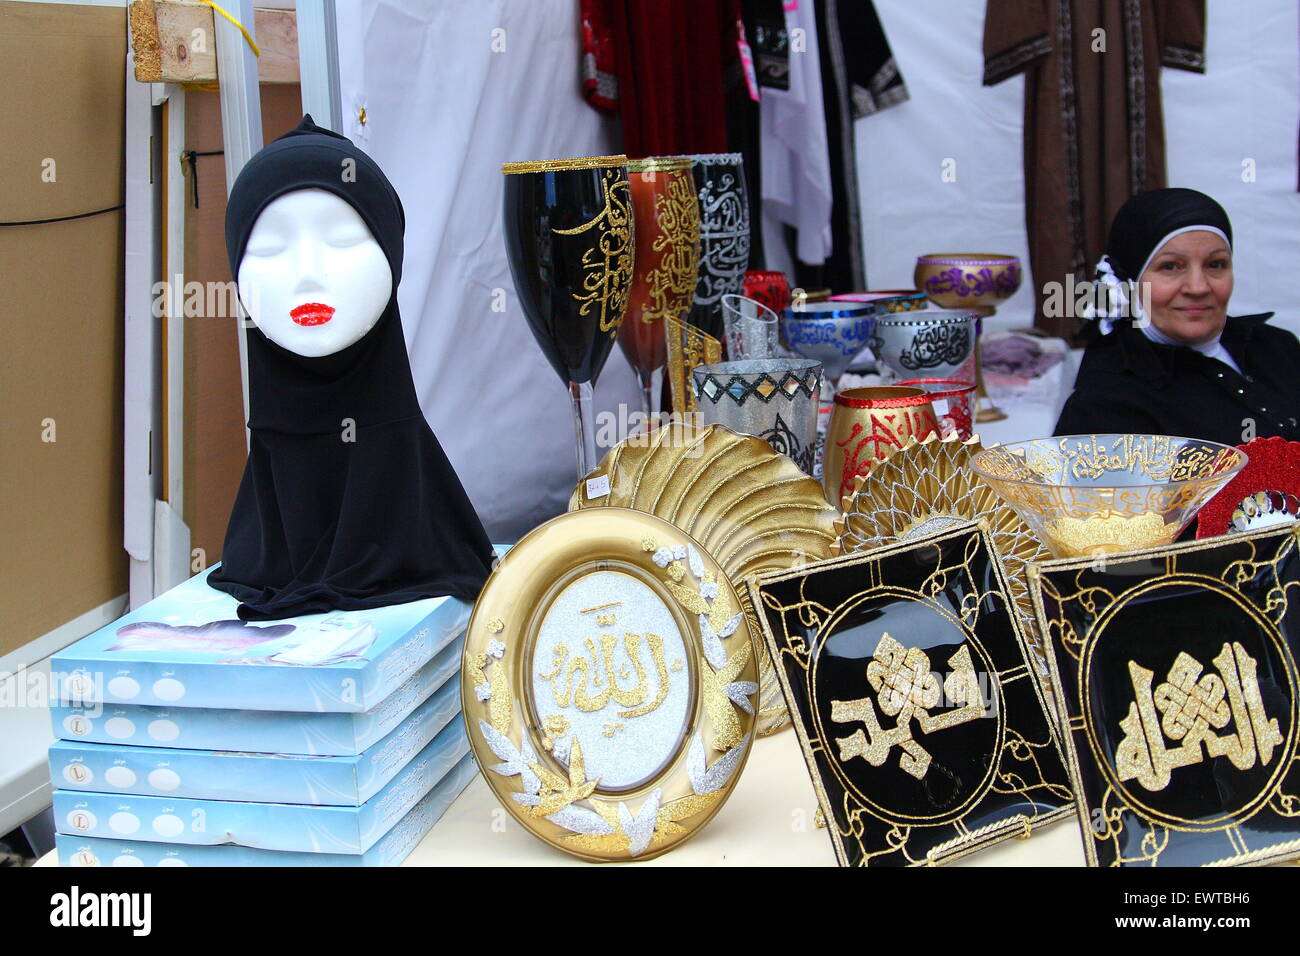 Market stall selling Islamic decorations and clothing during Eid festival in Dandenong Melbourne Australia Stock Photo